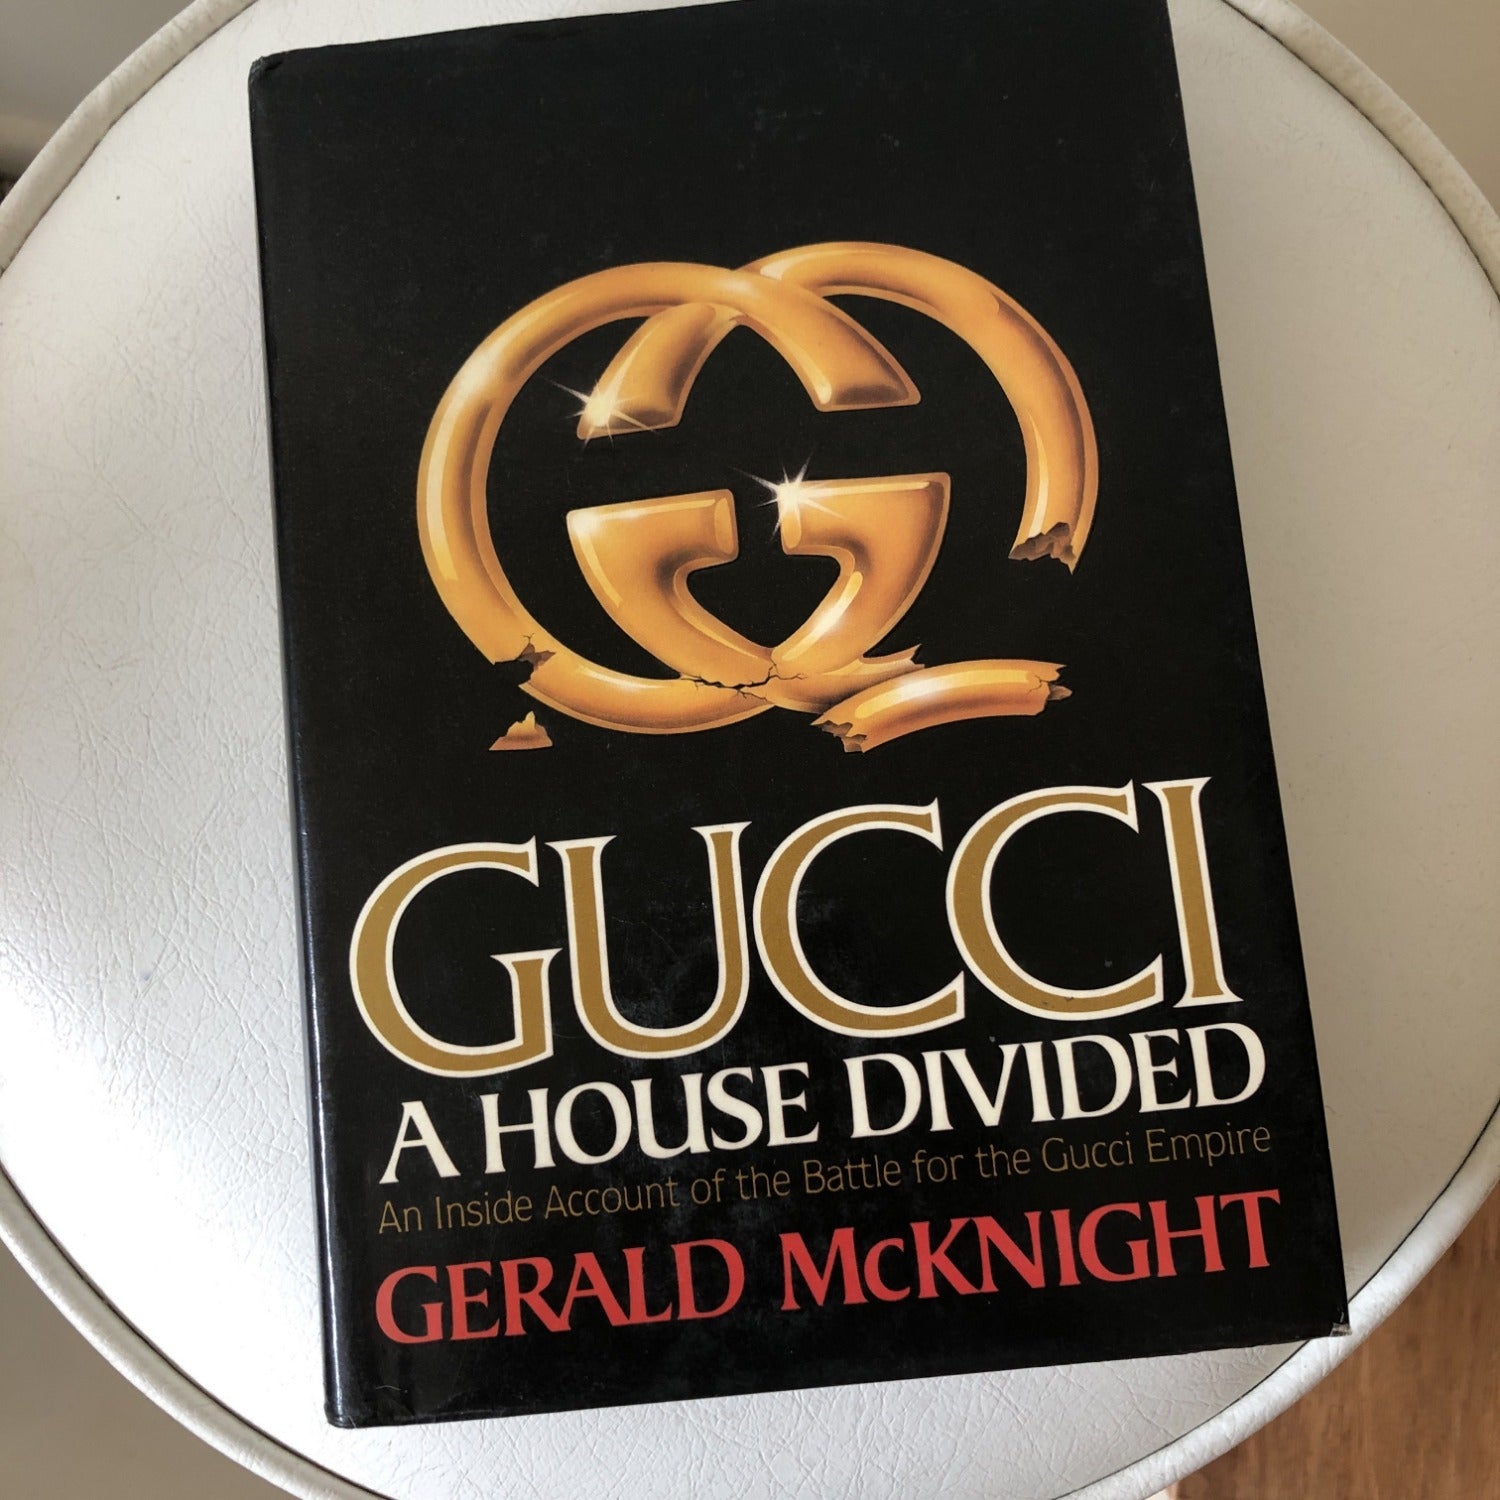 Gucci: A House Divided by Gerald McKnight